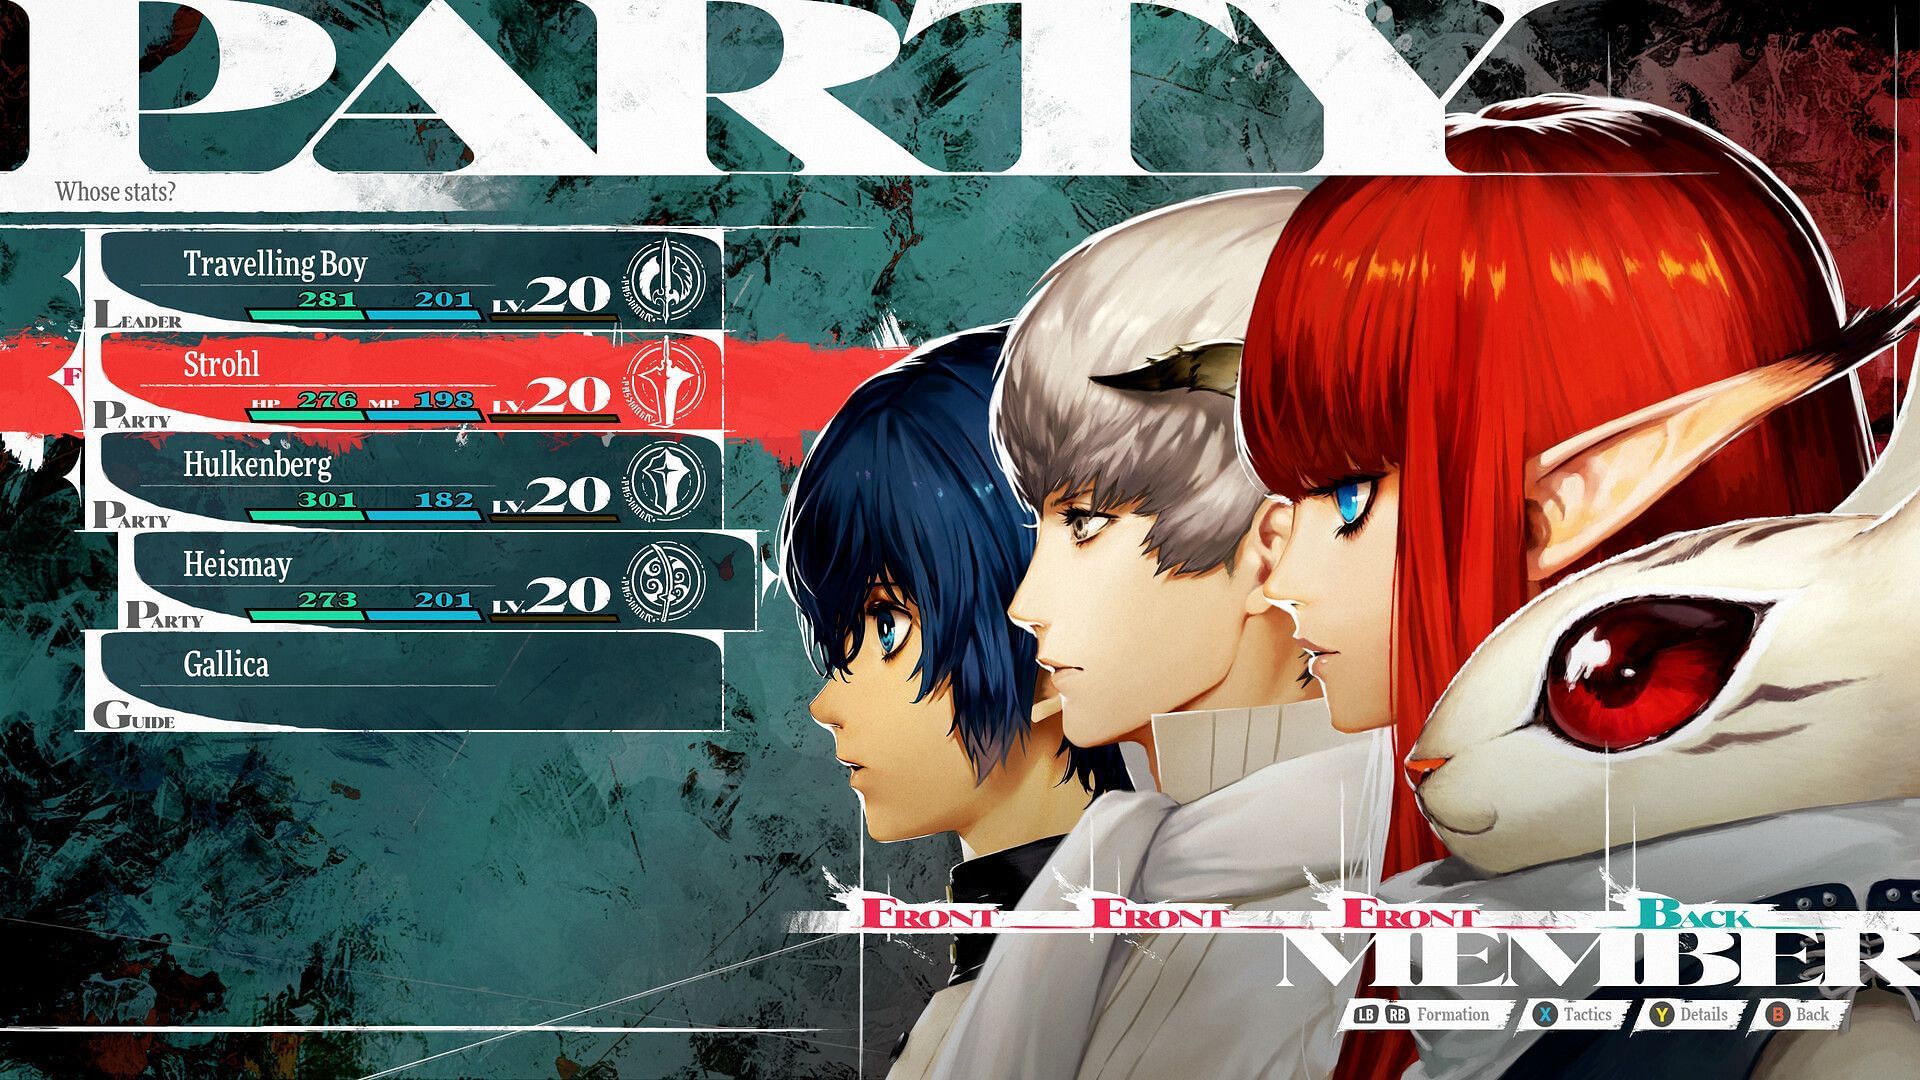 After years of mainline SMT and Persona games, Atlus is bringing a new IP (Image via ATLUS)